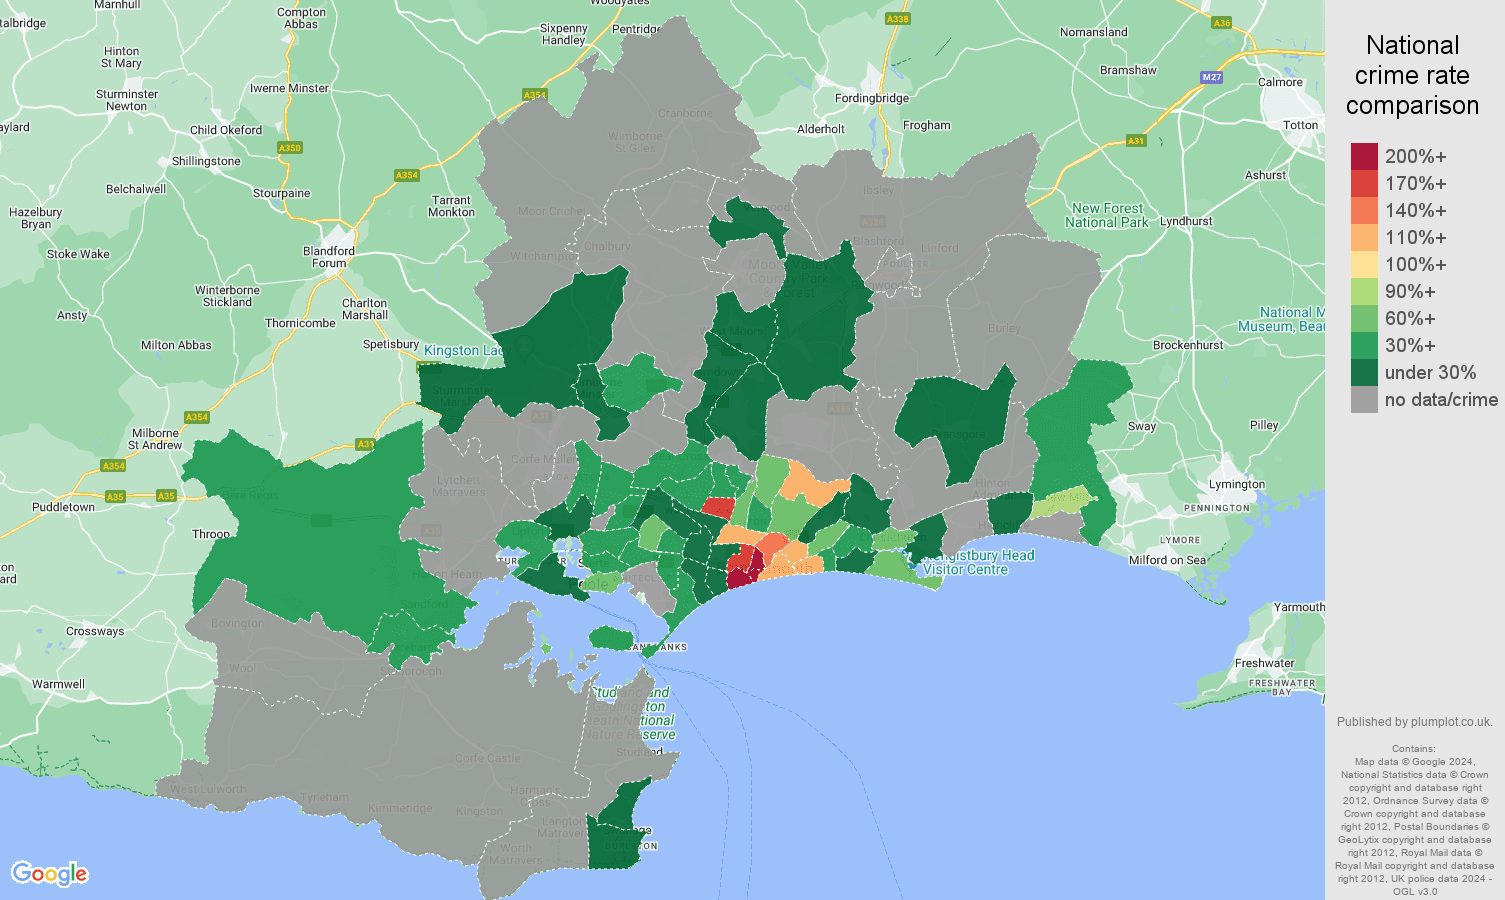 Bournemouth robbery crime rate comparison map